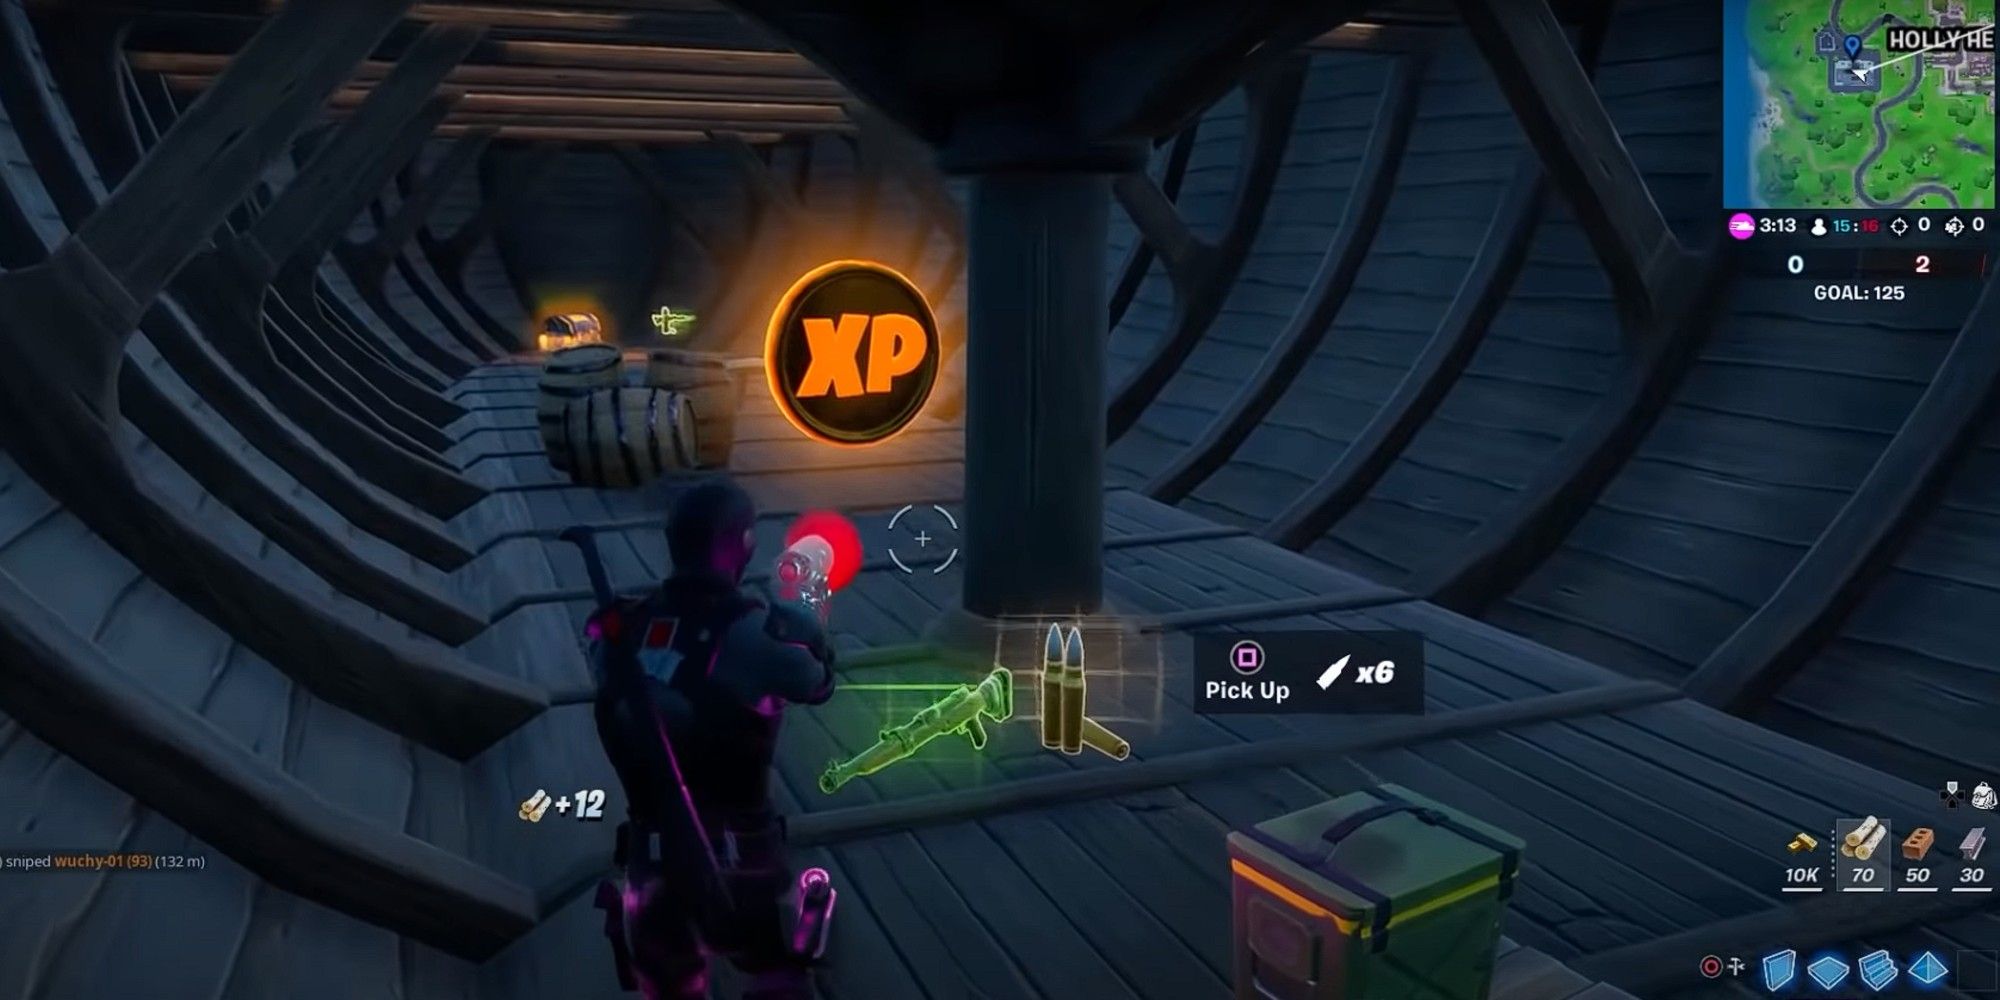 The Gold XP Coin inside the Viking Vessel during Week 11 of Fortnite Season 5